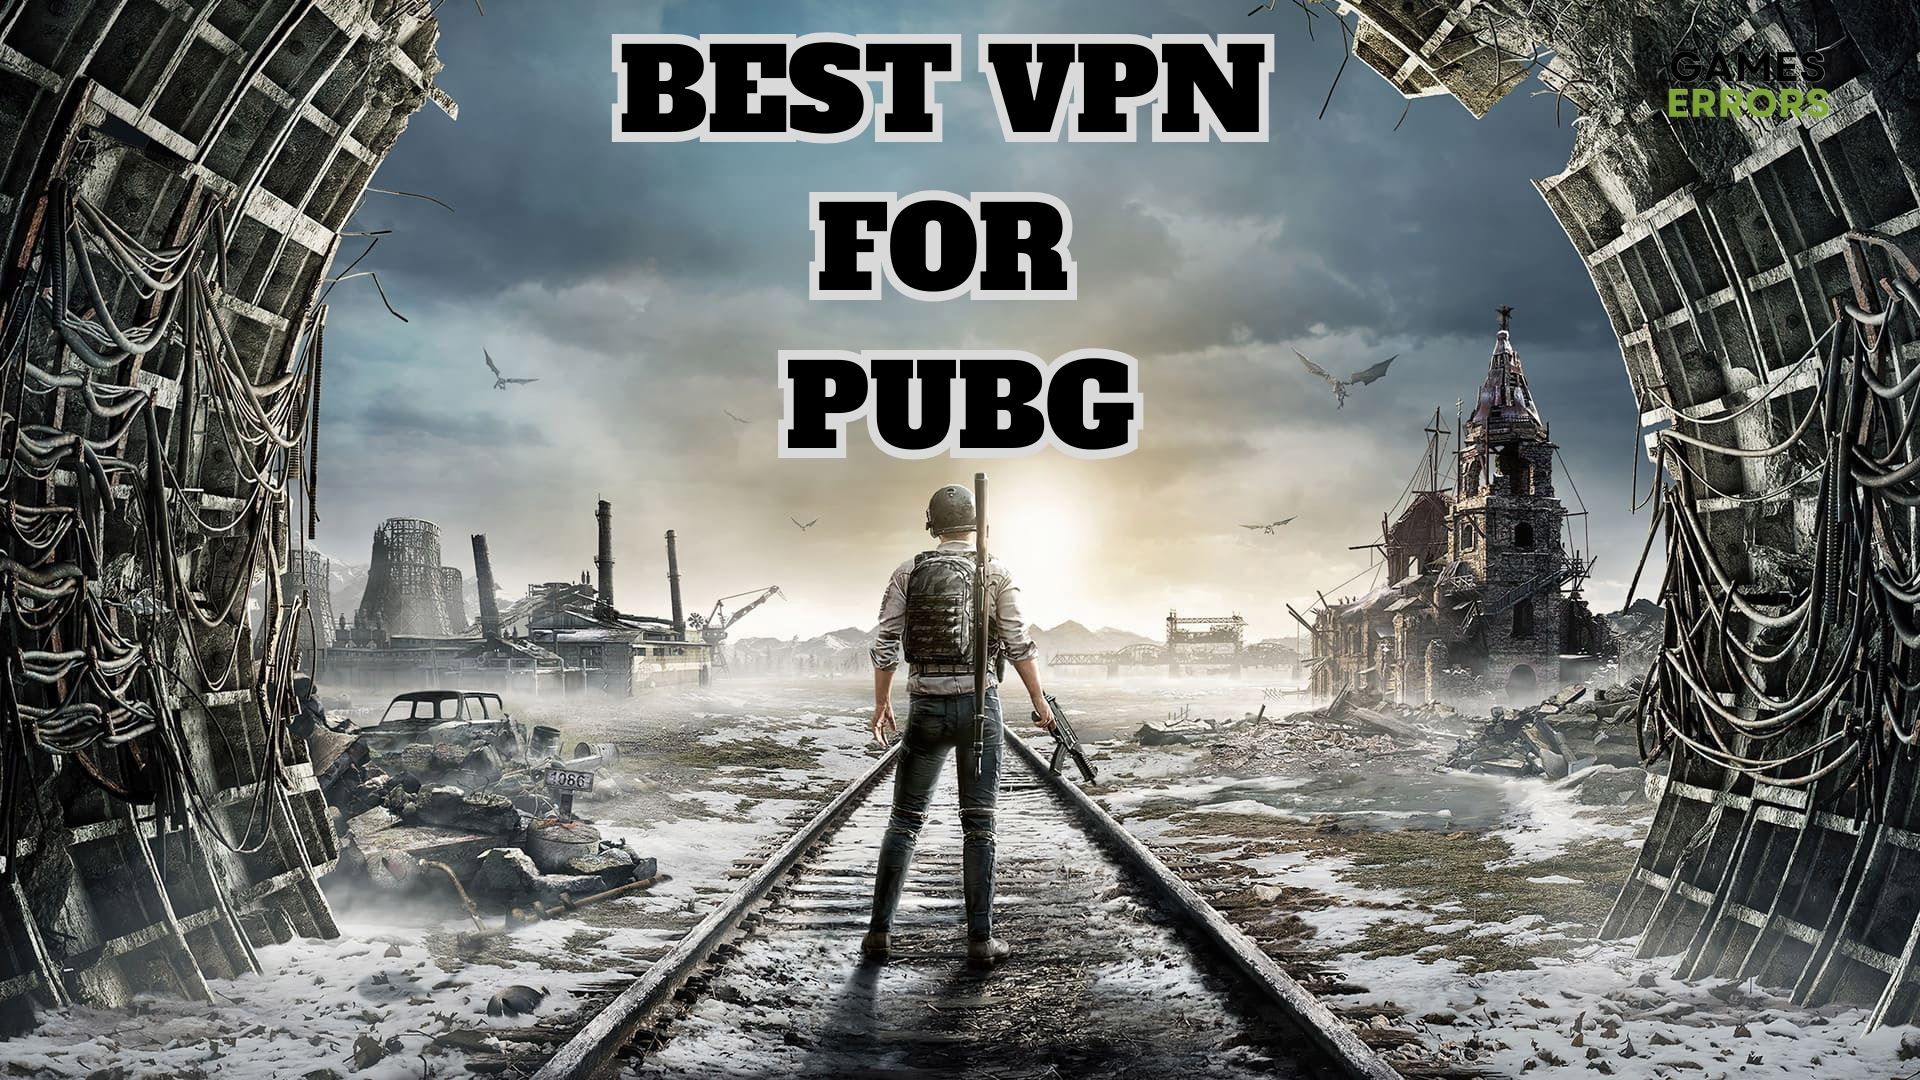 Best VPN For PUBG: Check Our Top Favorites